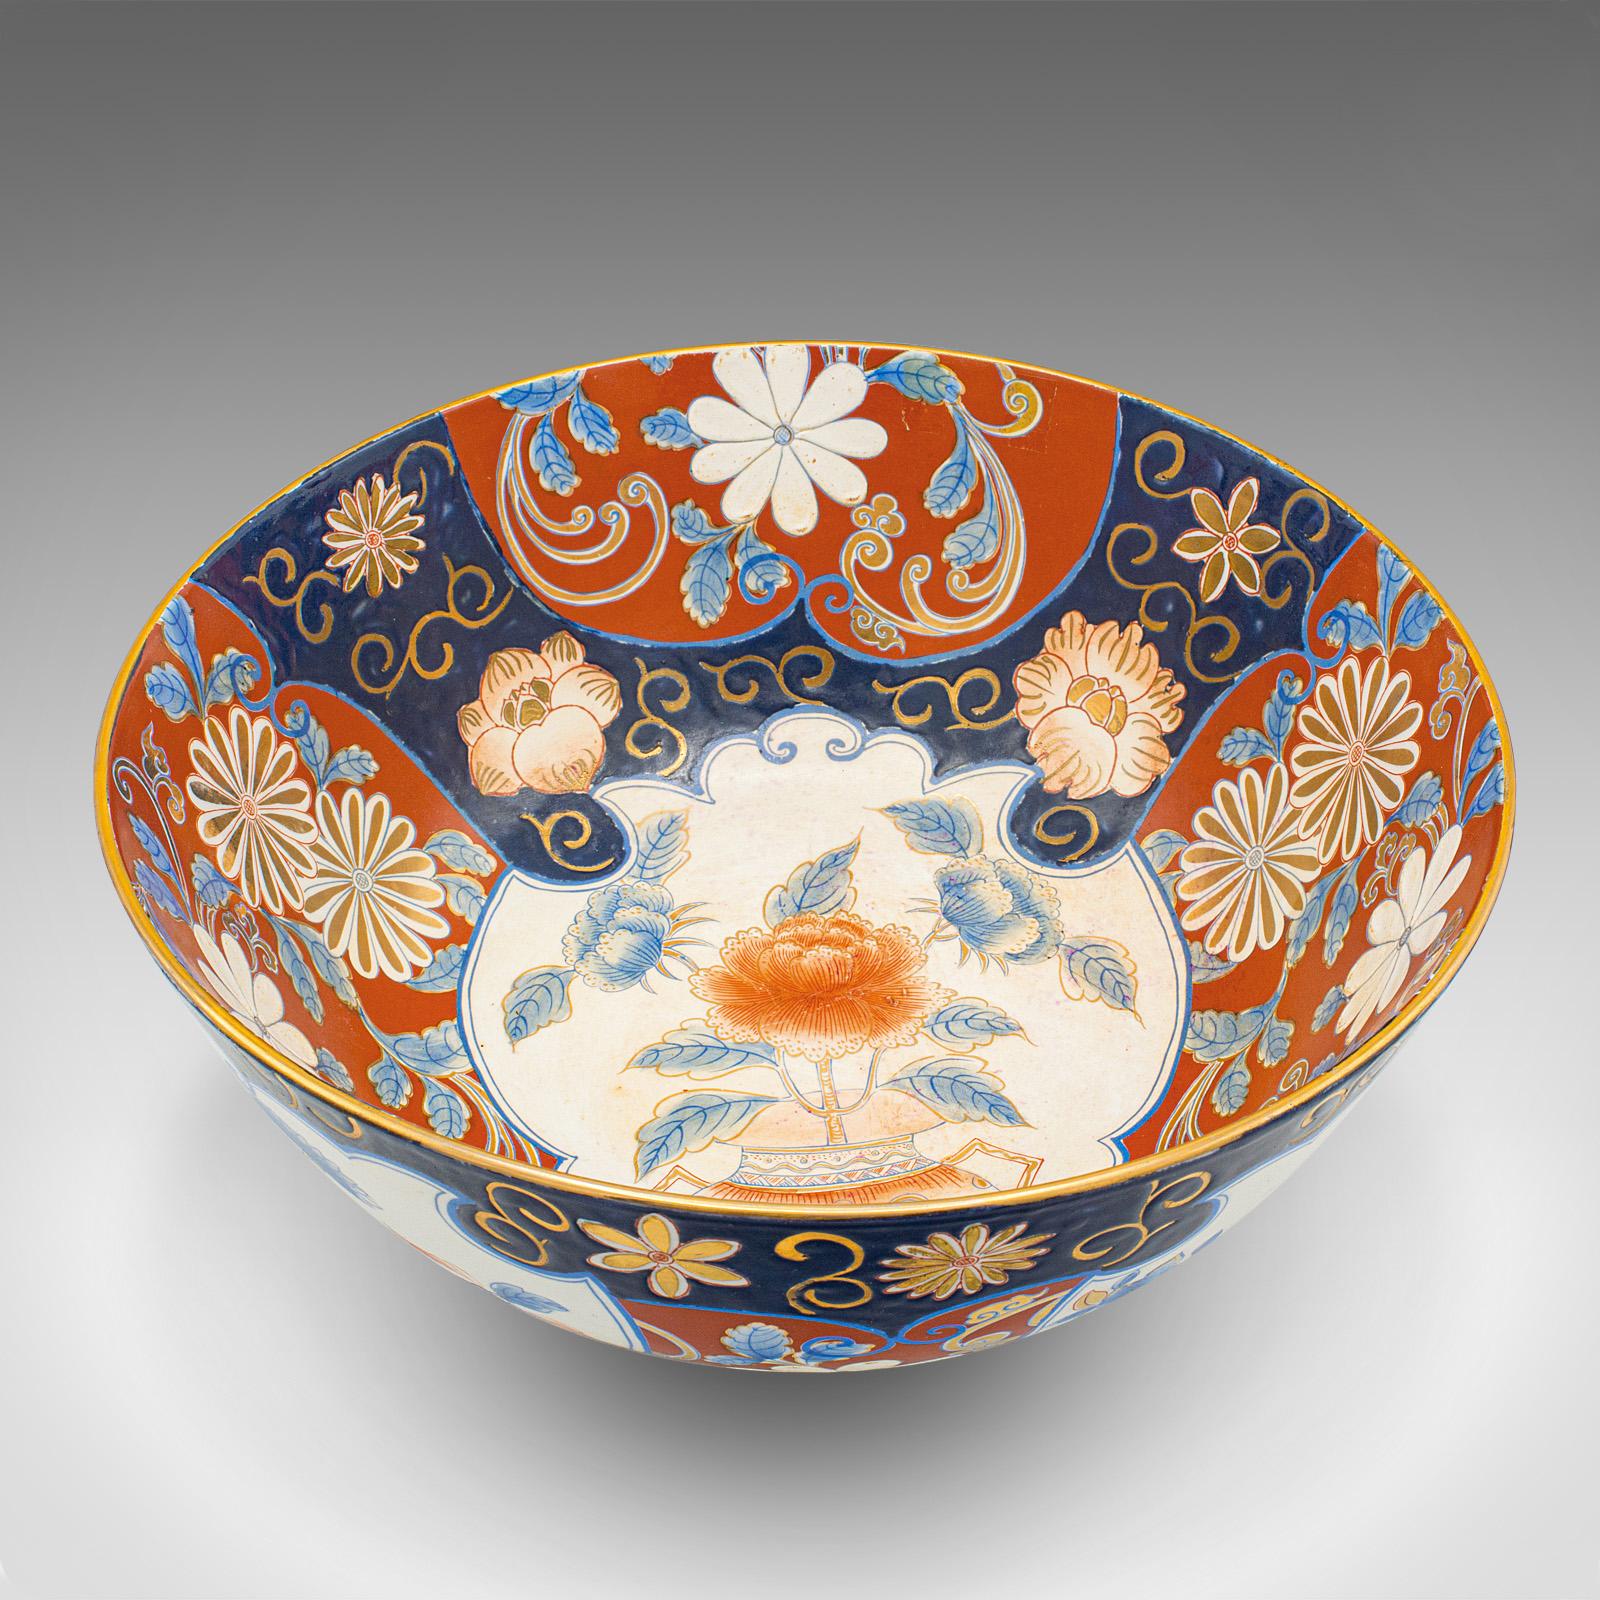 This is a large vintage decorative bowl. A Japanese, ceramic serving dish in Art Deco revival Imari pattern, dating to the late 20th century, circa 1980.

Impressively broad dish accentuated with striking Imari taste
Displays a desirable aged